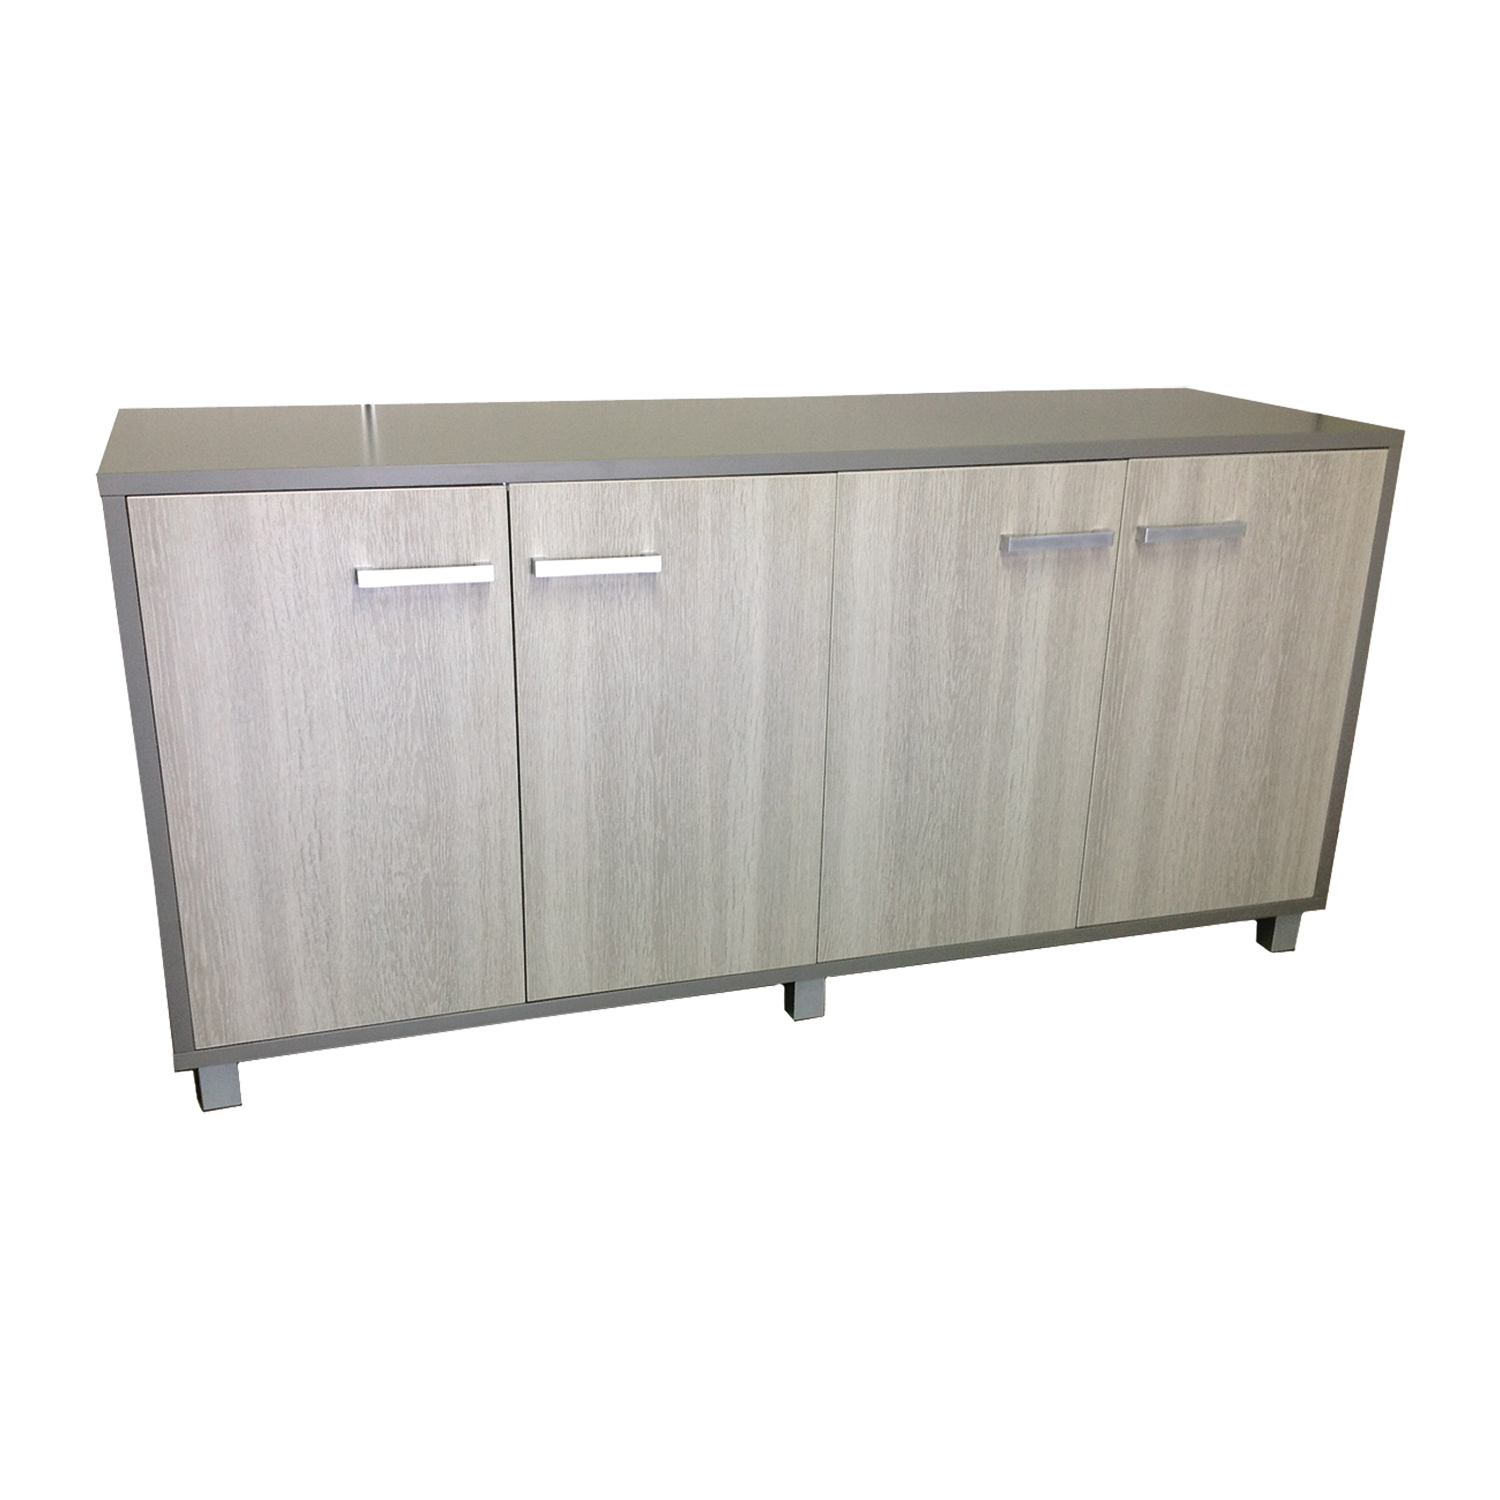 Educated furniture iquad credenza storage unit for office or school